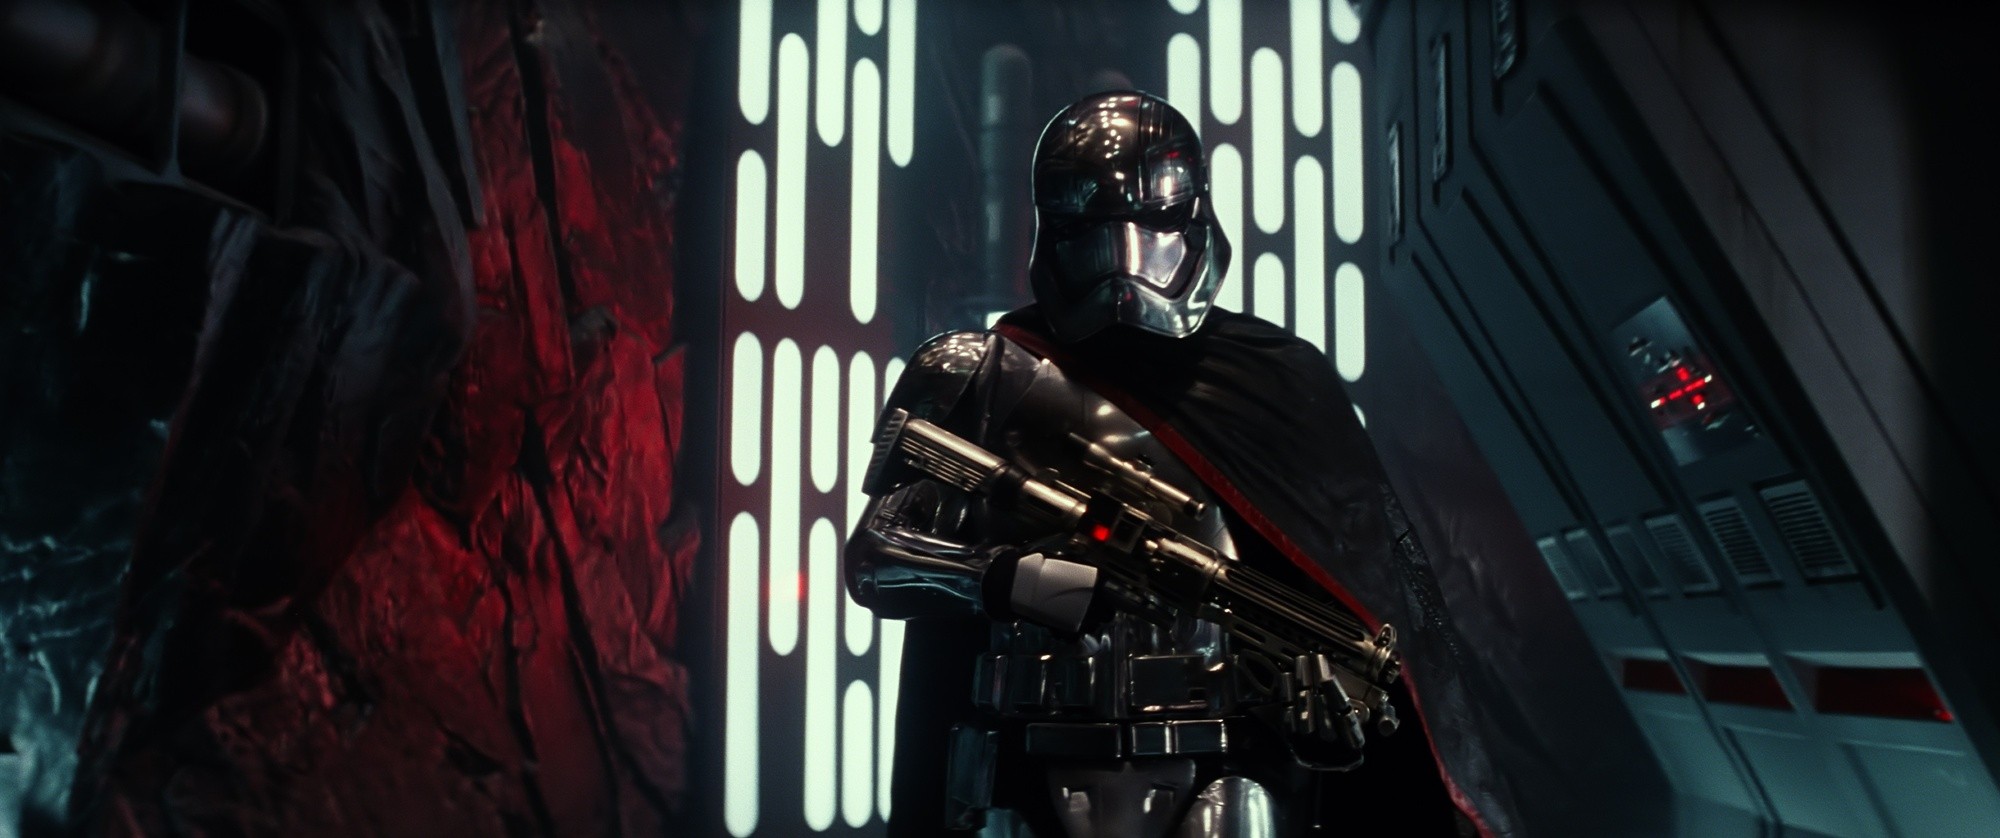 Captain Phasma from Walt Disney Pictures' Star Wars: The Force Awakens (2015)